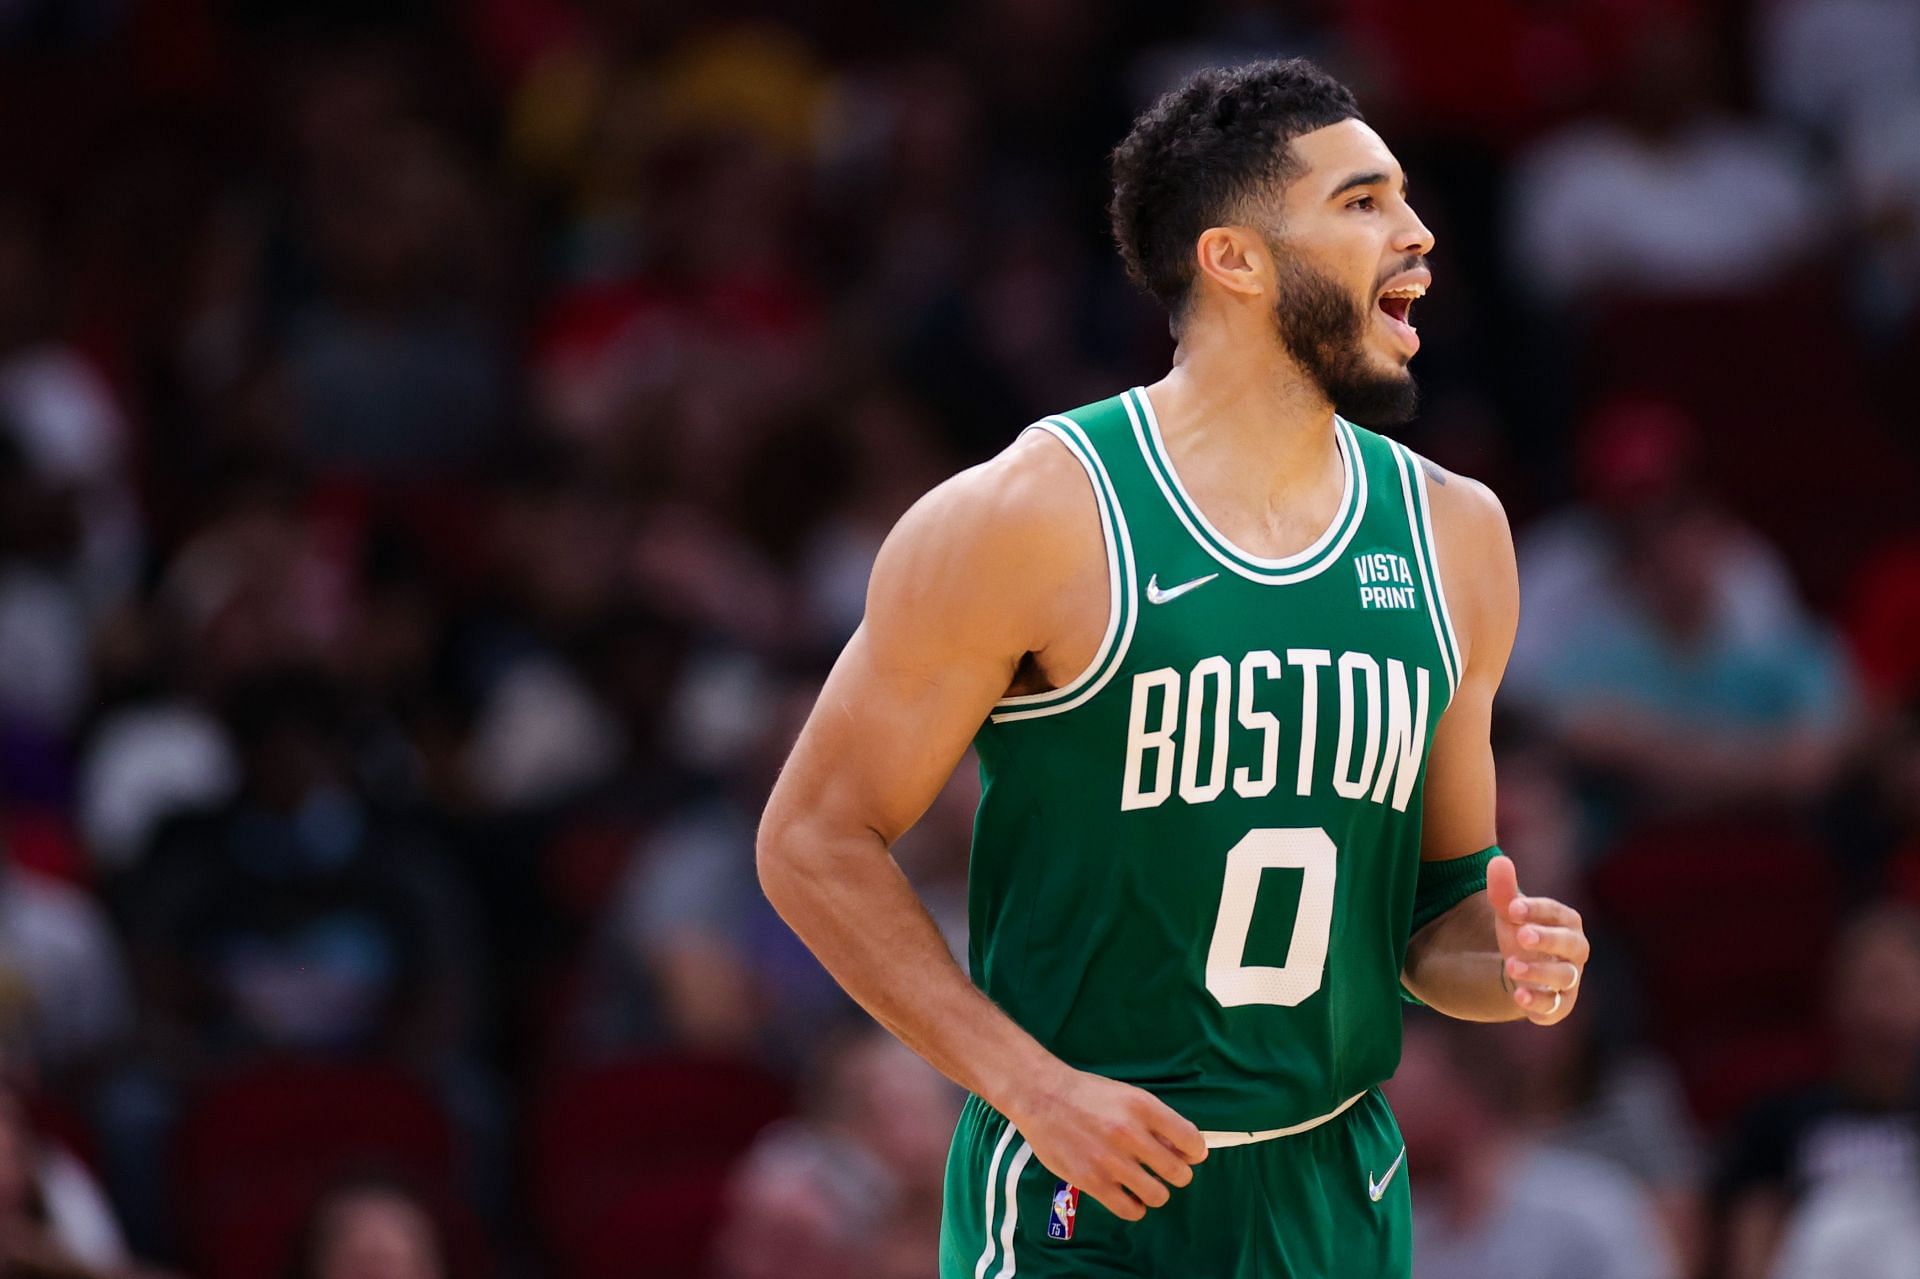 Jayson Tatum #0 of the Boston Celtics reacts towards his bench during the second half against the Houston Rockets at Toyota Center on October 24, 2021 in Houston, Texas